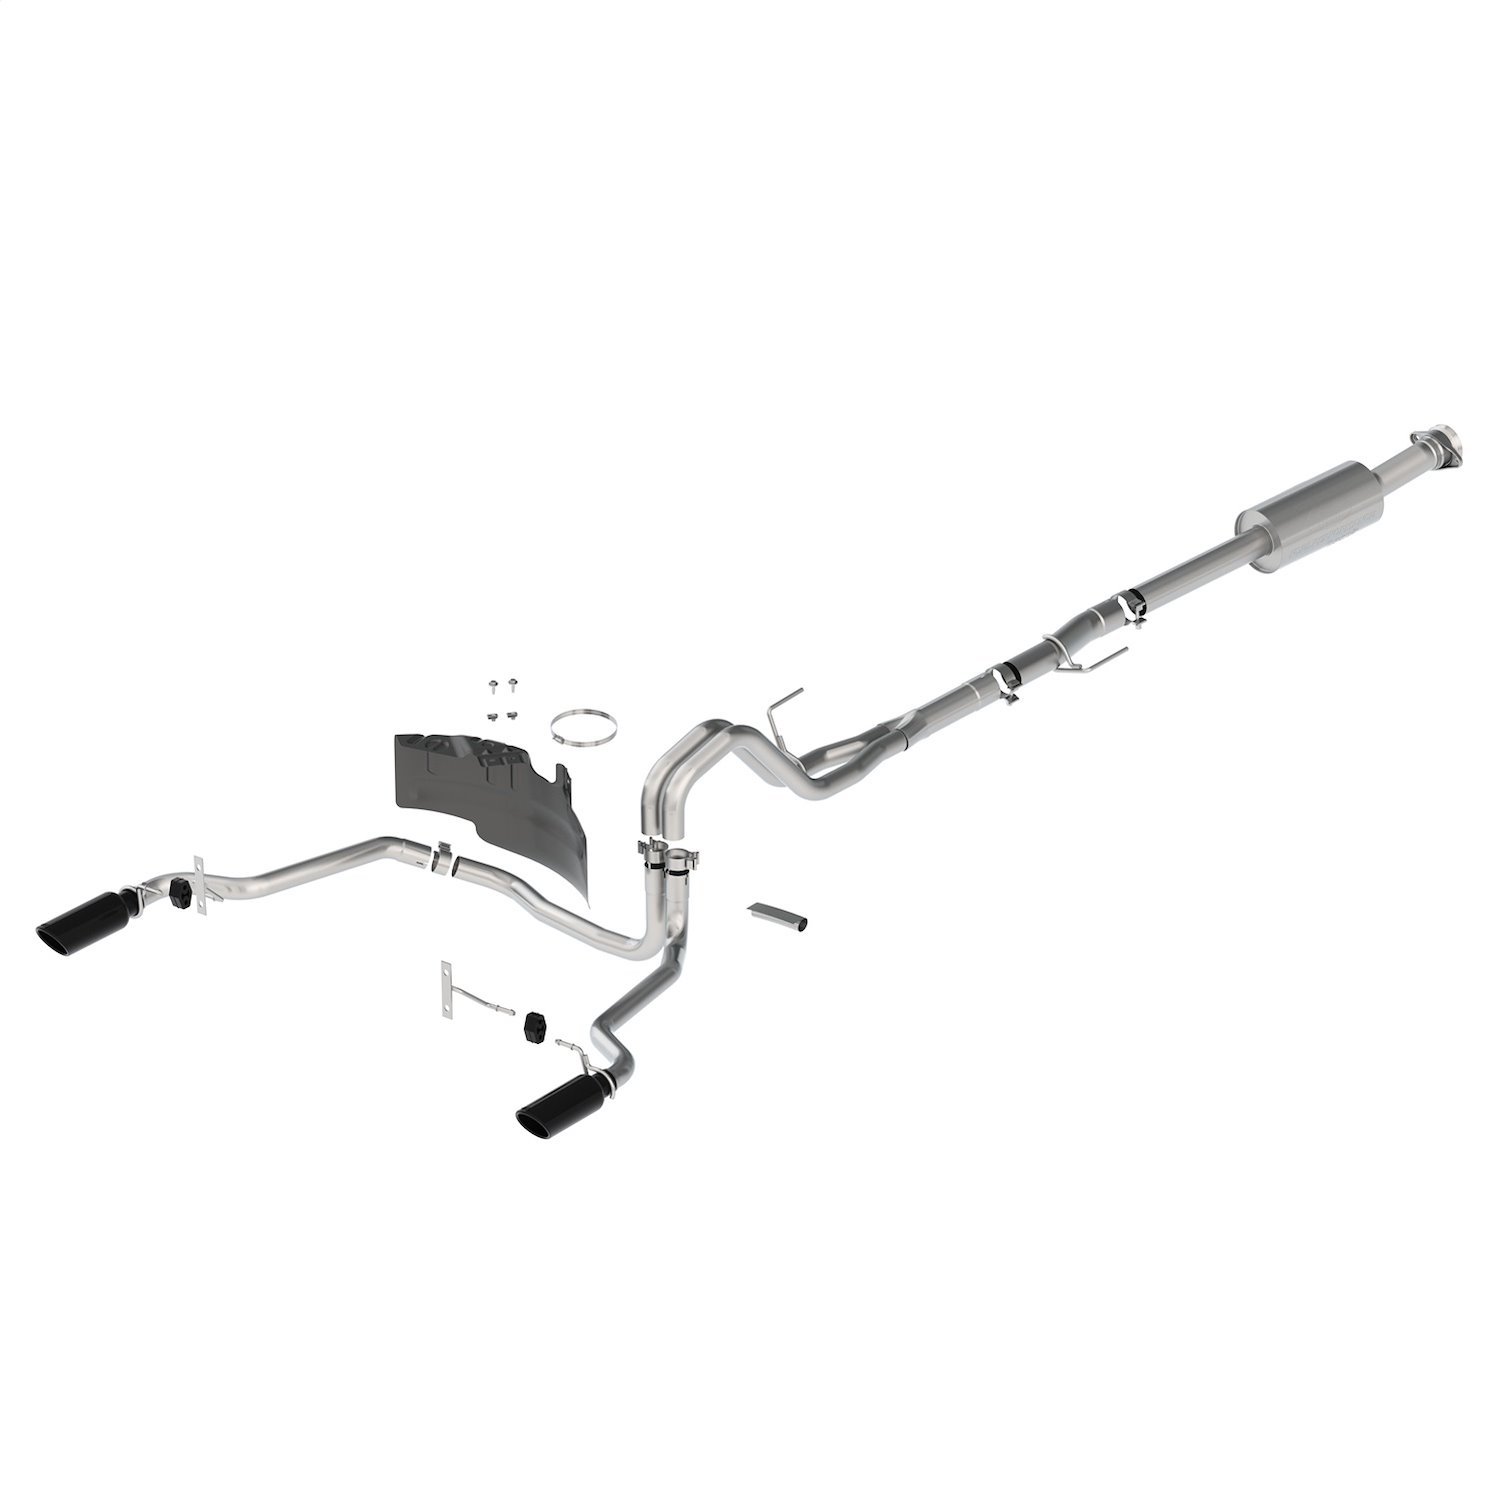 Cat-Back Extreme Exhaust System Fits Select Ford F-150 2.7L, 3.5L, 5.0L Trucks w/145, 157 in. WB [Black Chrome Tips]